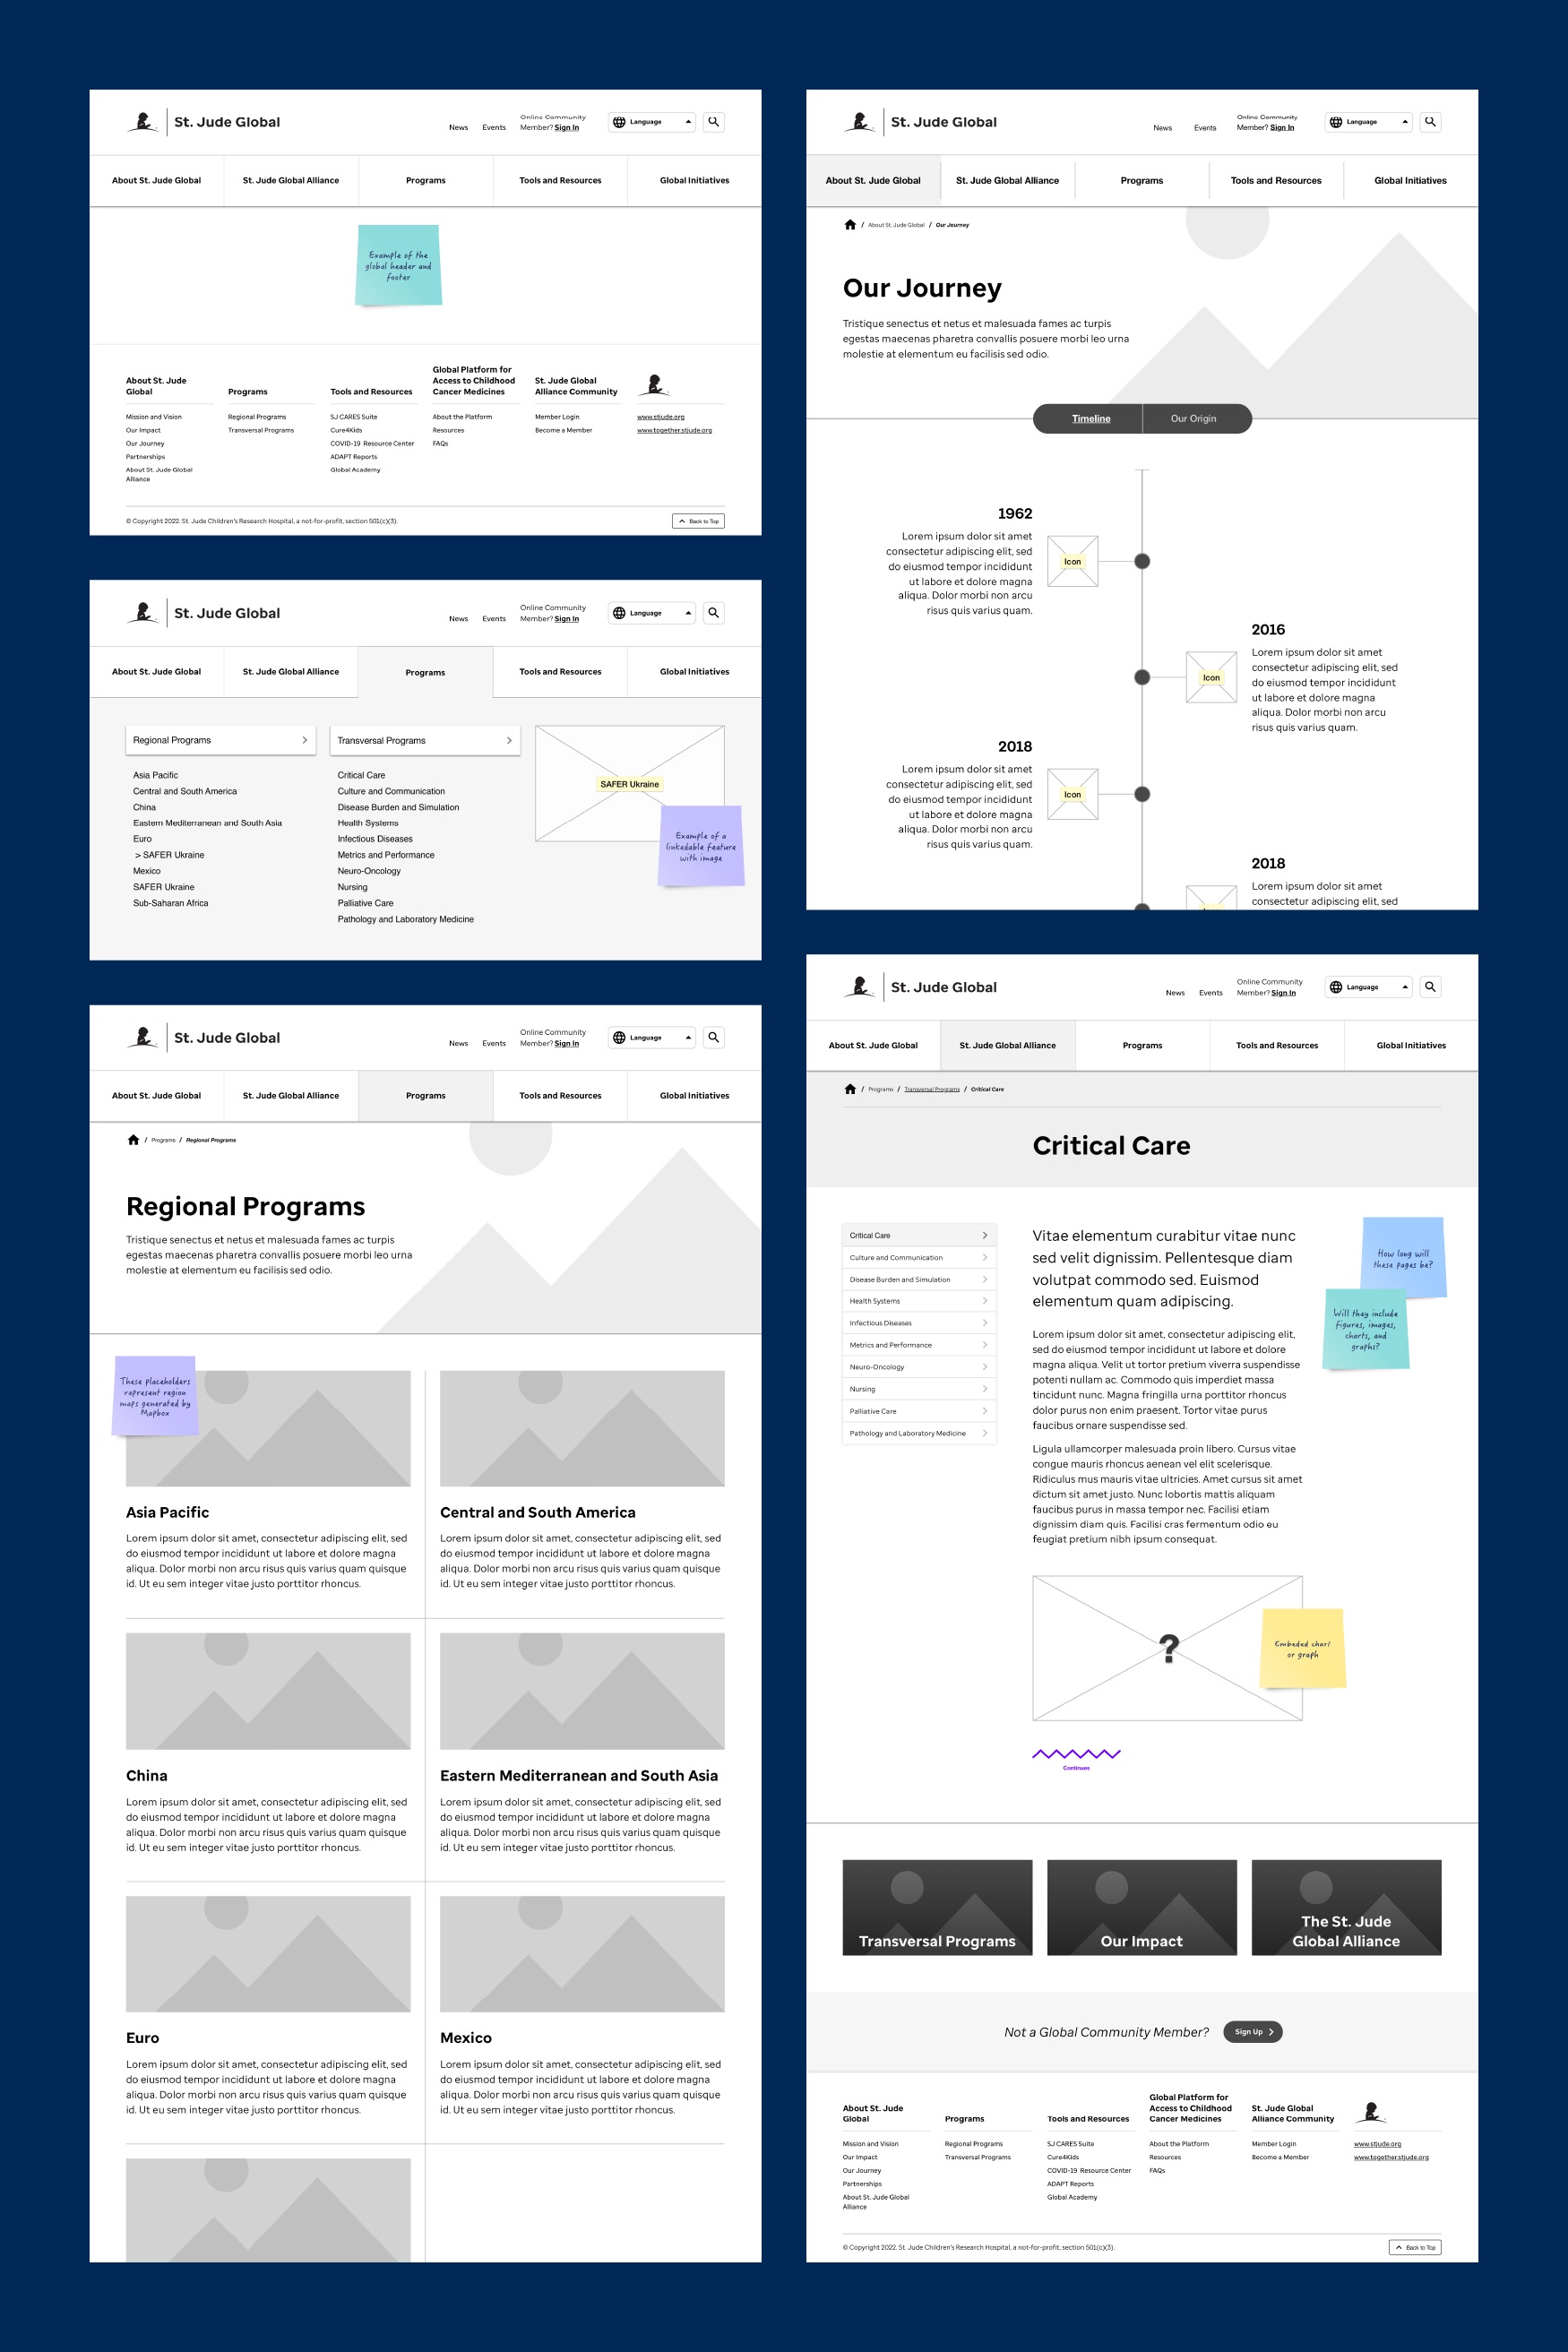 A collection of wireframes for the St. Jude Global website